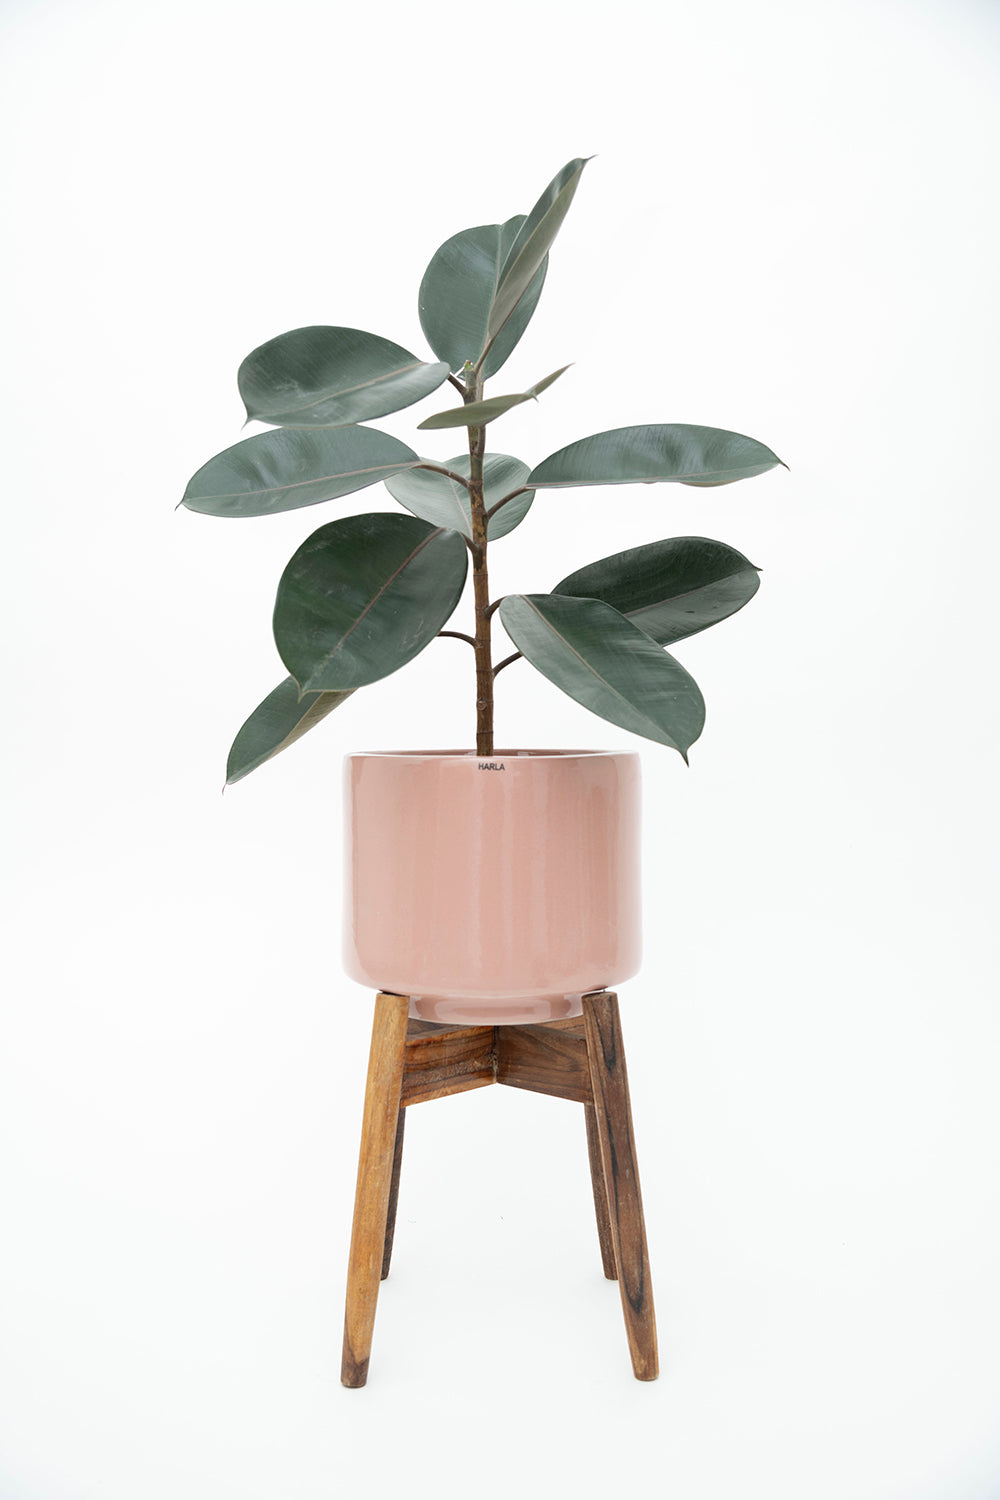 Medium Size Pink Color Crimson Sky Ceramic Planter along with Wooden stand and Rubber plant in it.